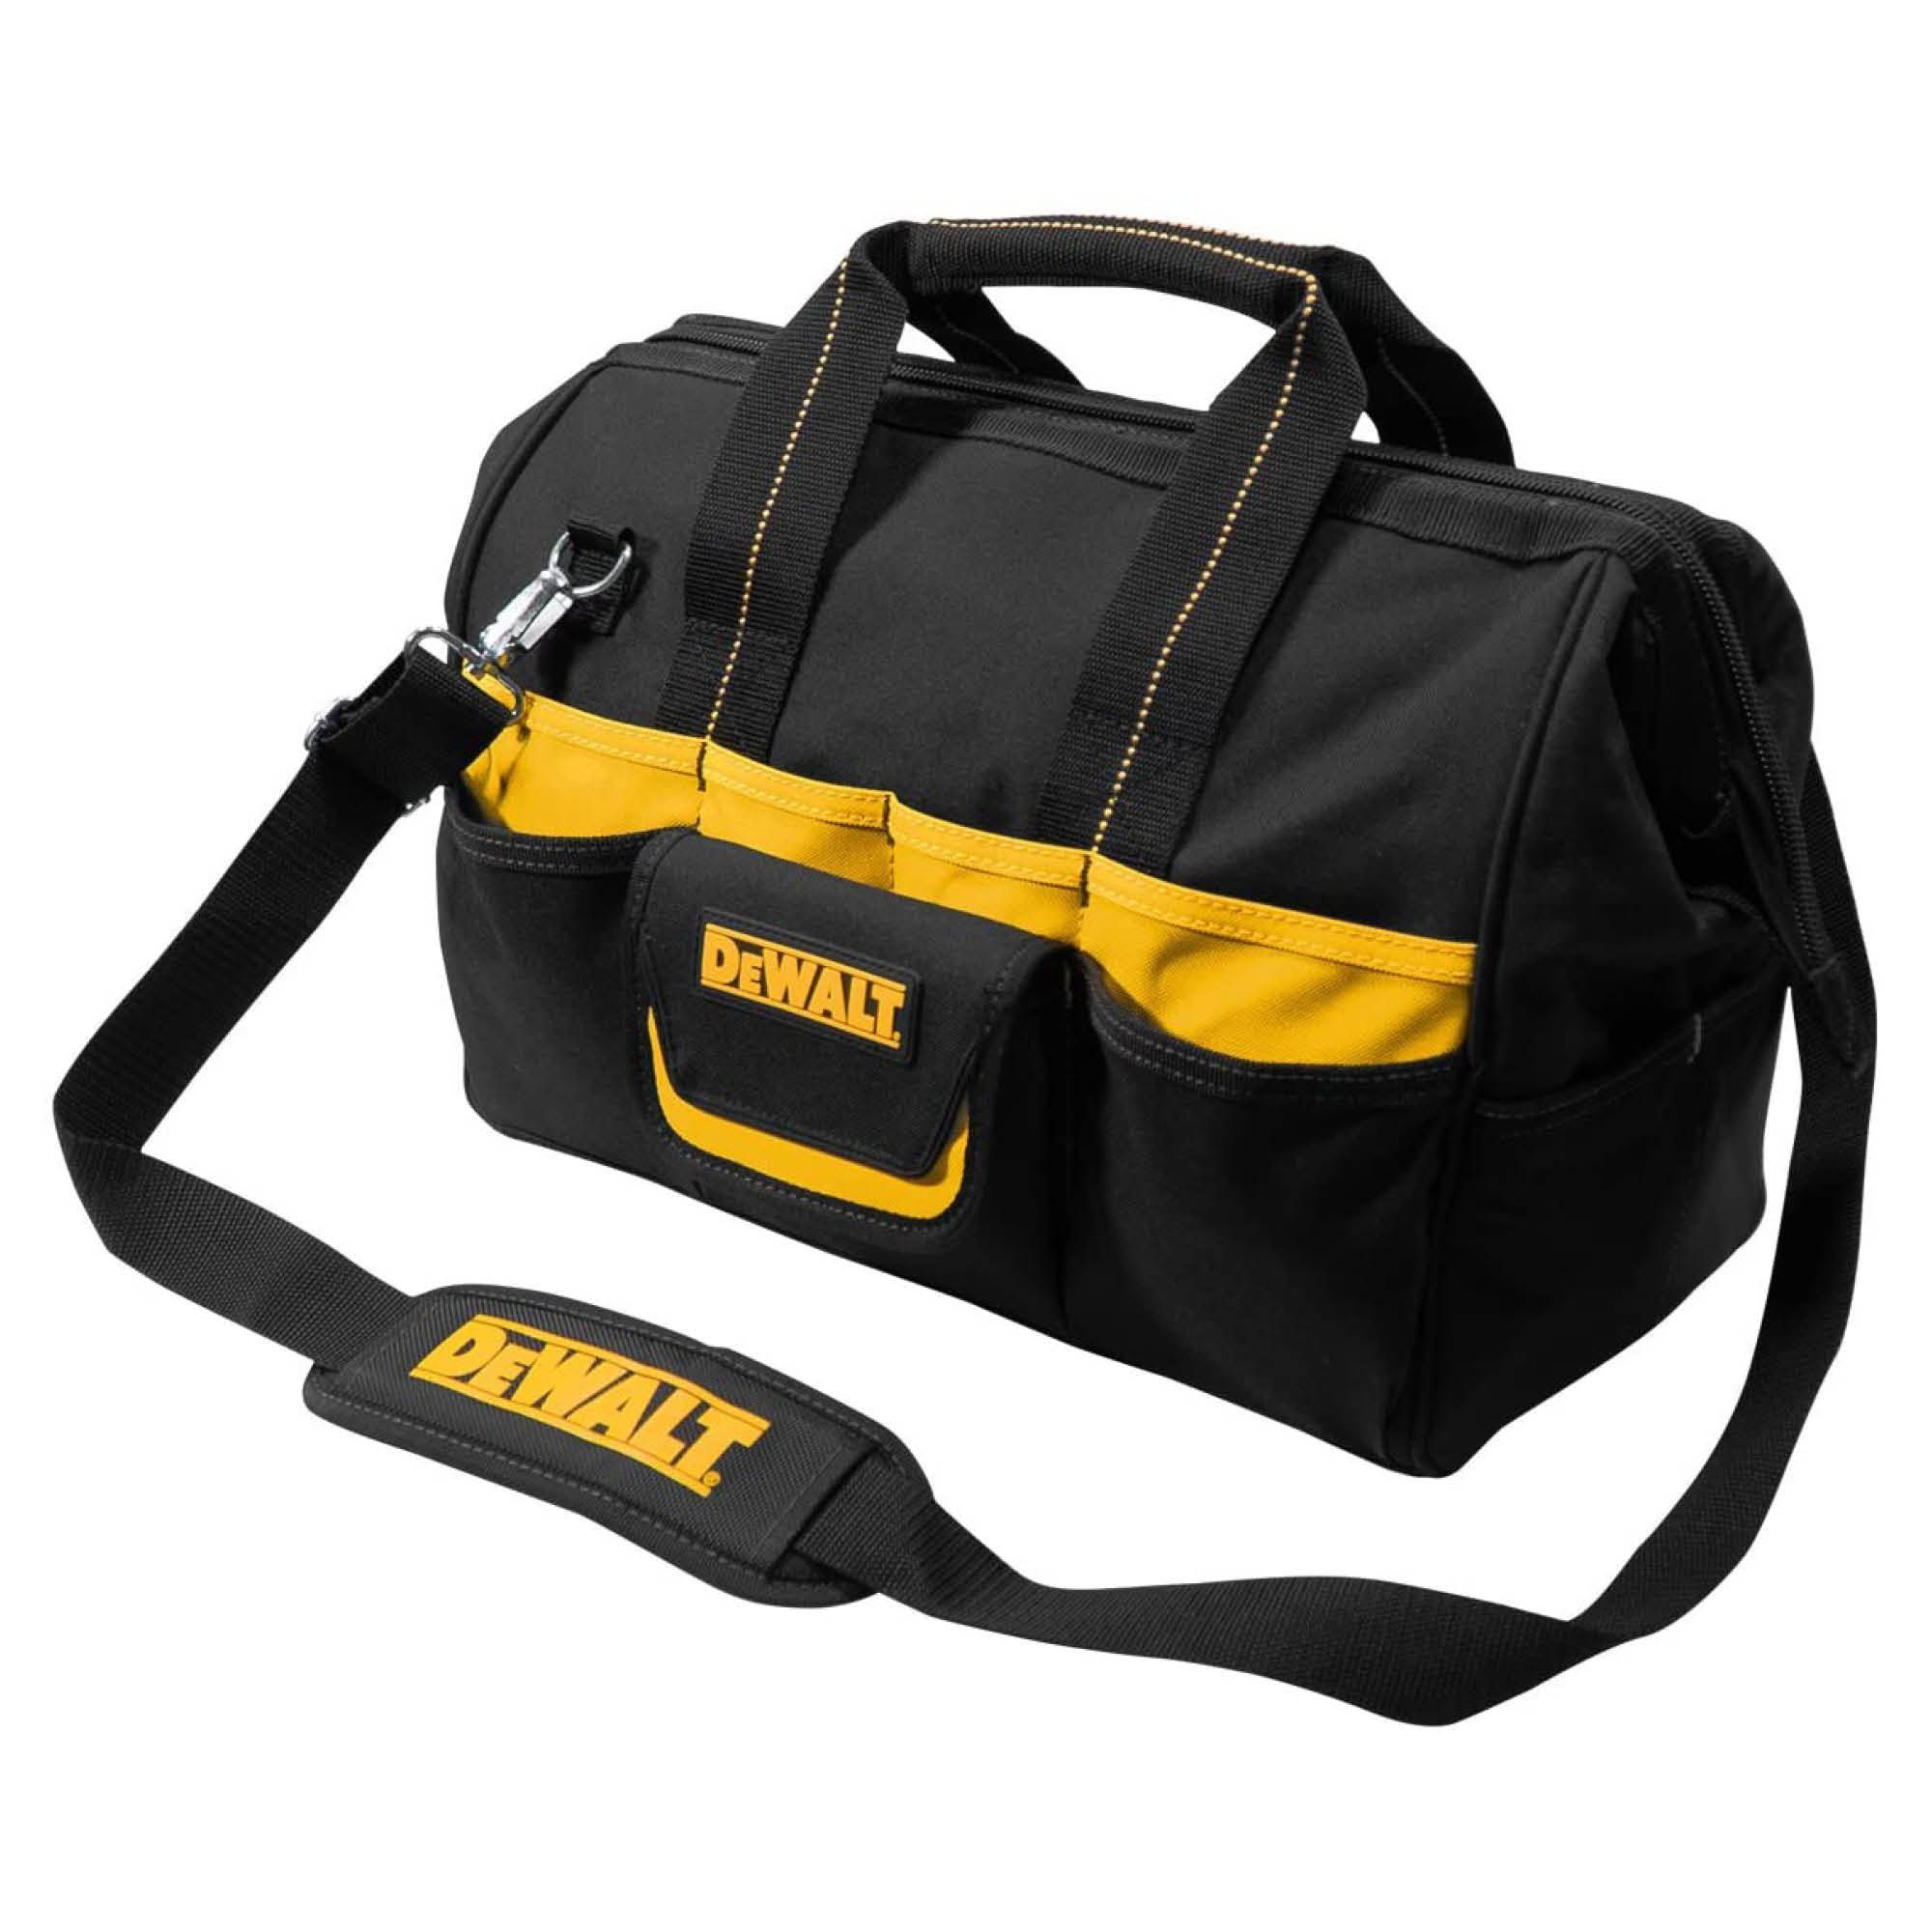 15" TOOL BAG HEAVY DUTY BLACK & YELLOW CARRY TOTE STORAGE CHEST ORGANISER 380MM 